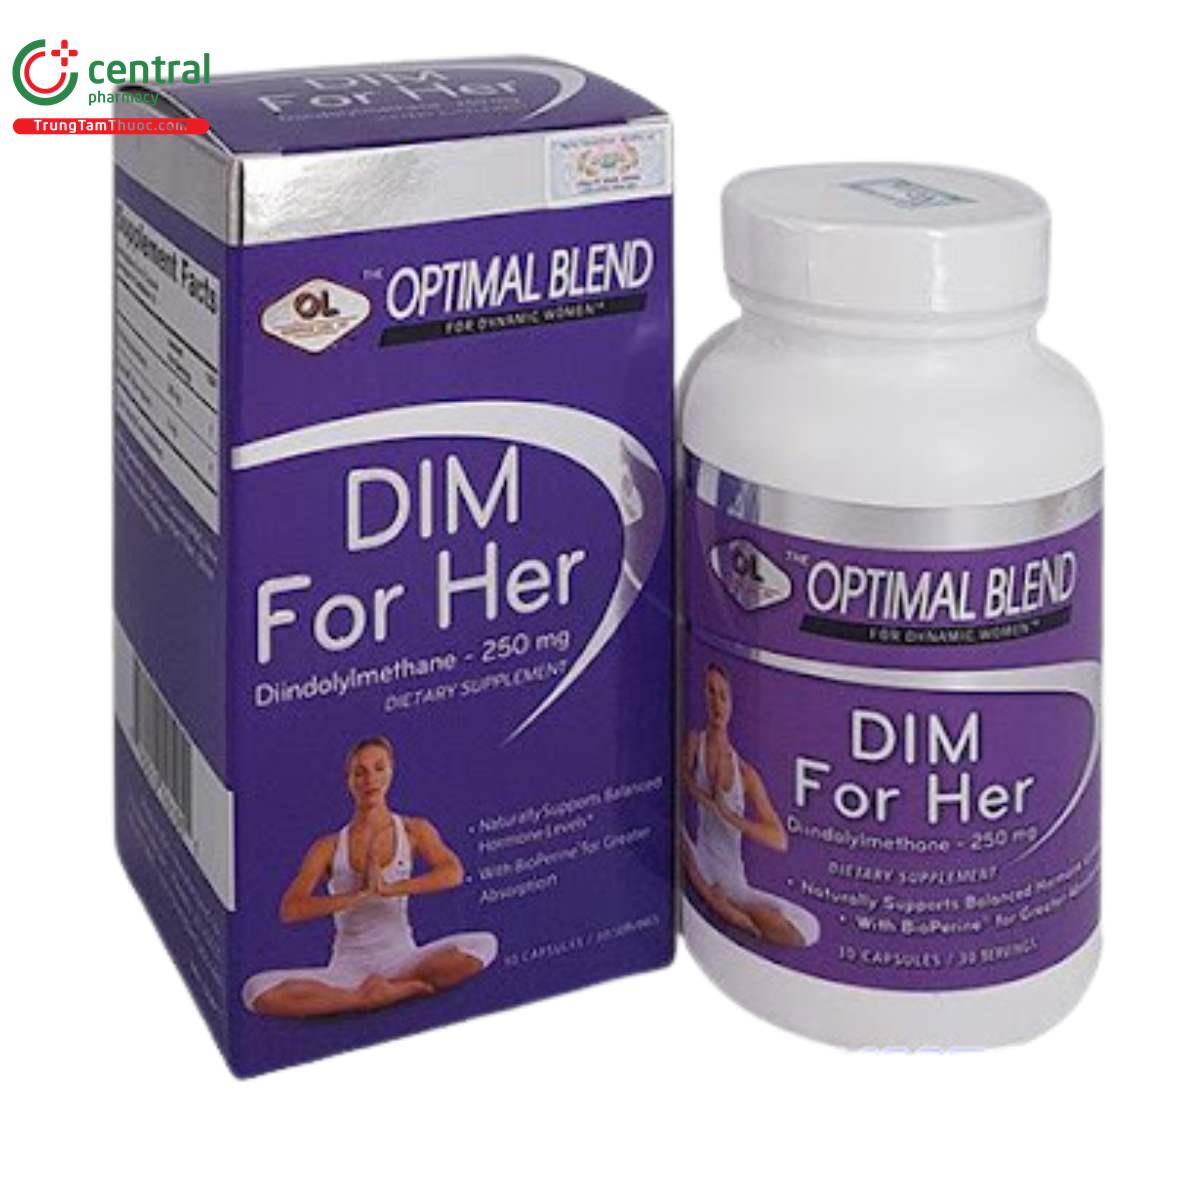 dim for her 250mg 1 V8246